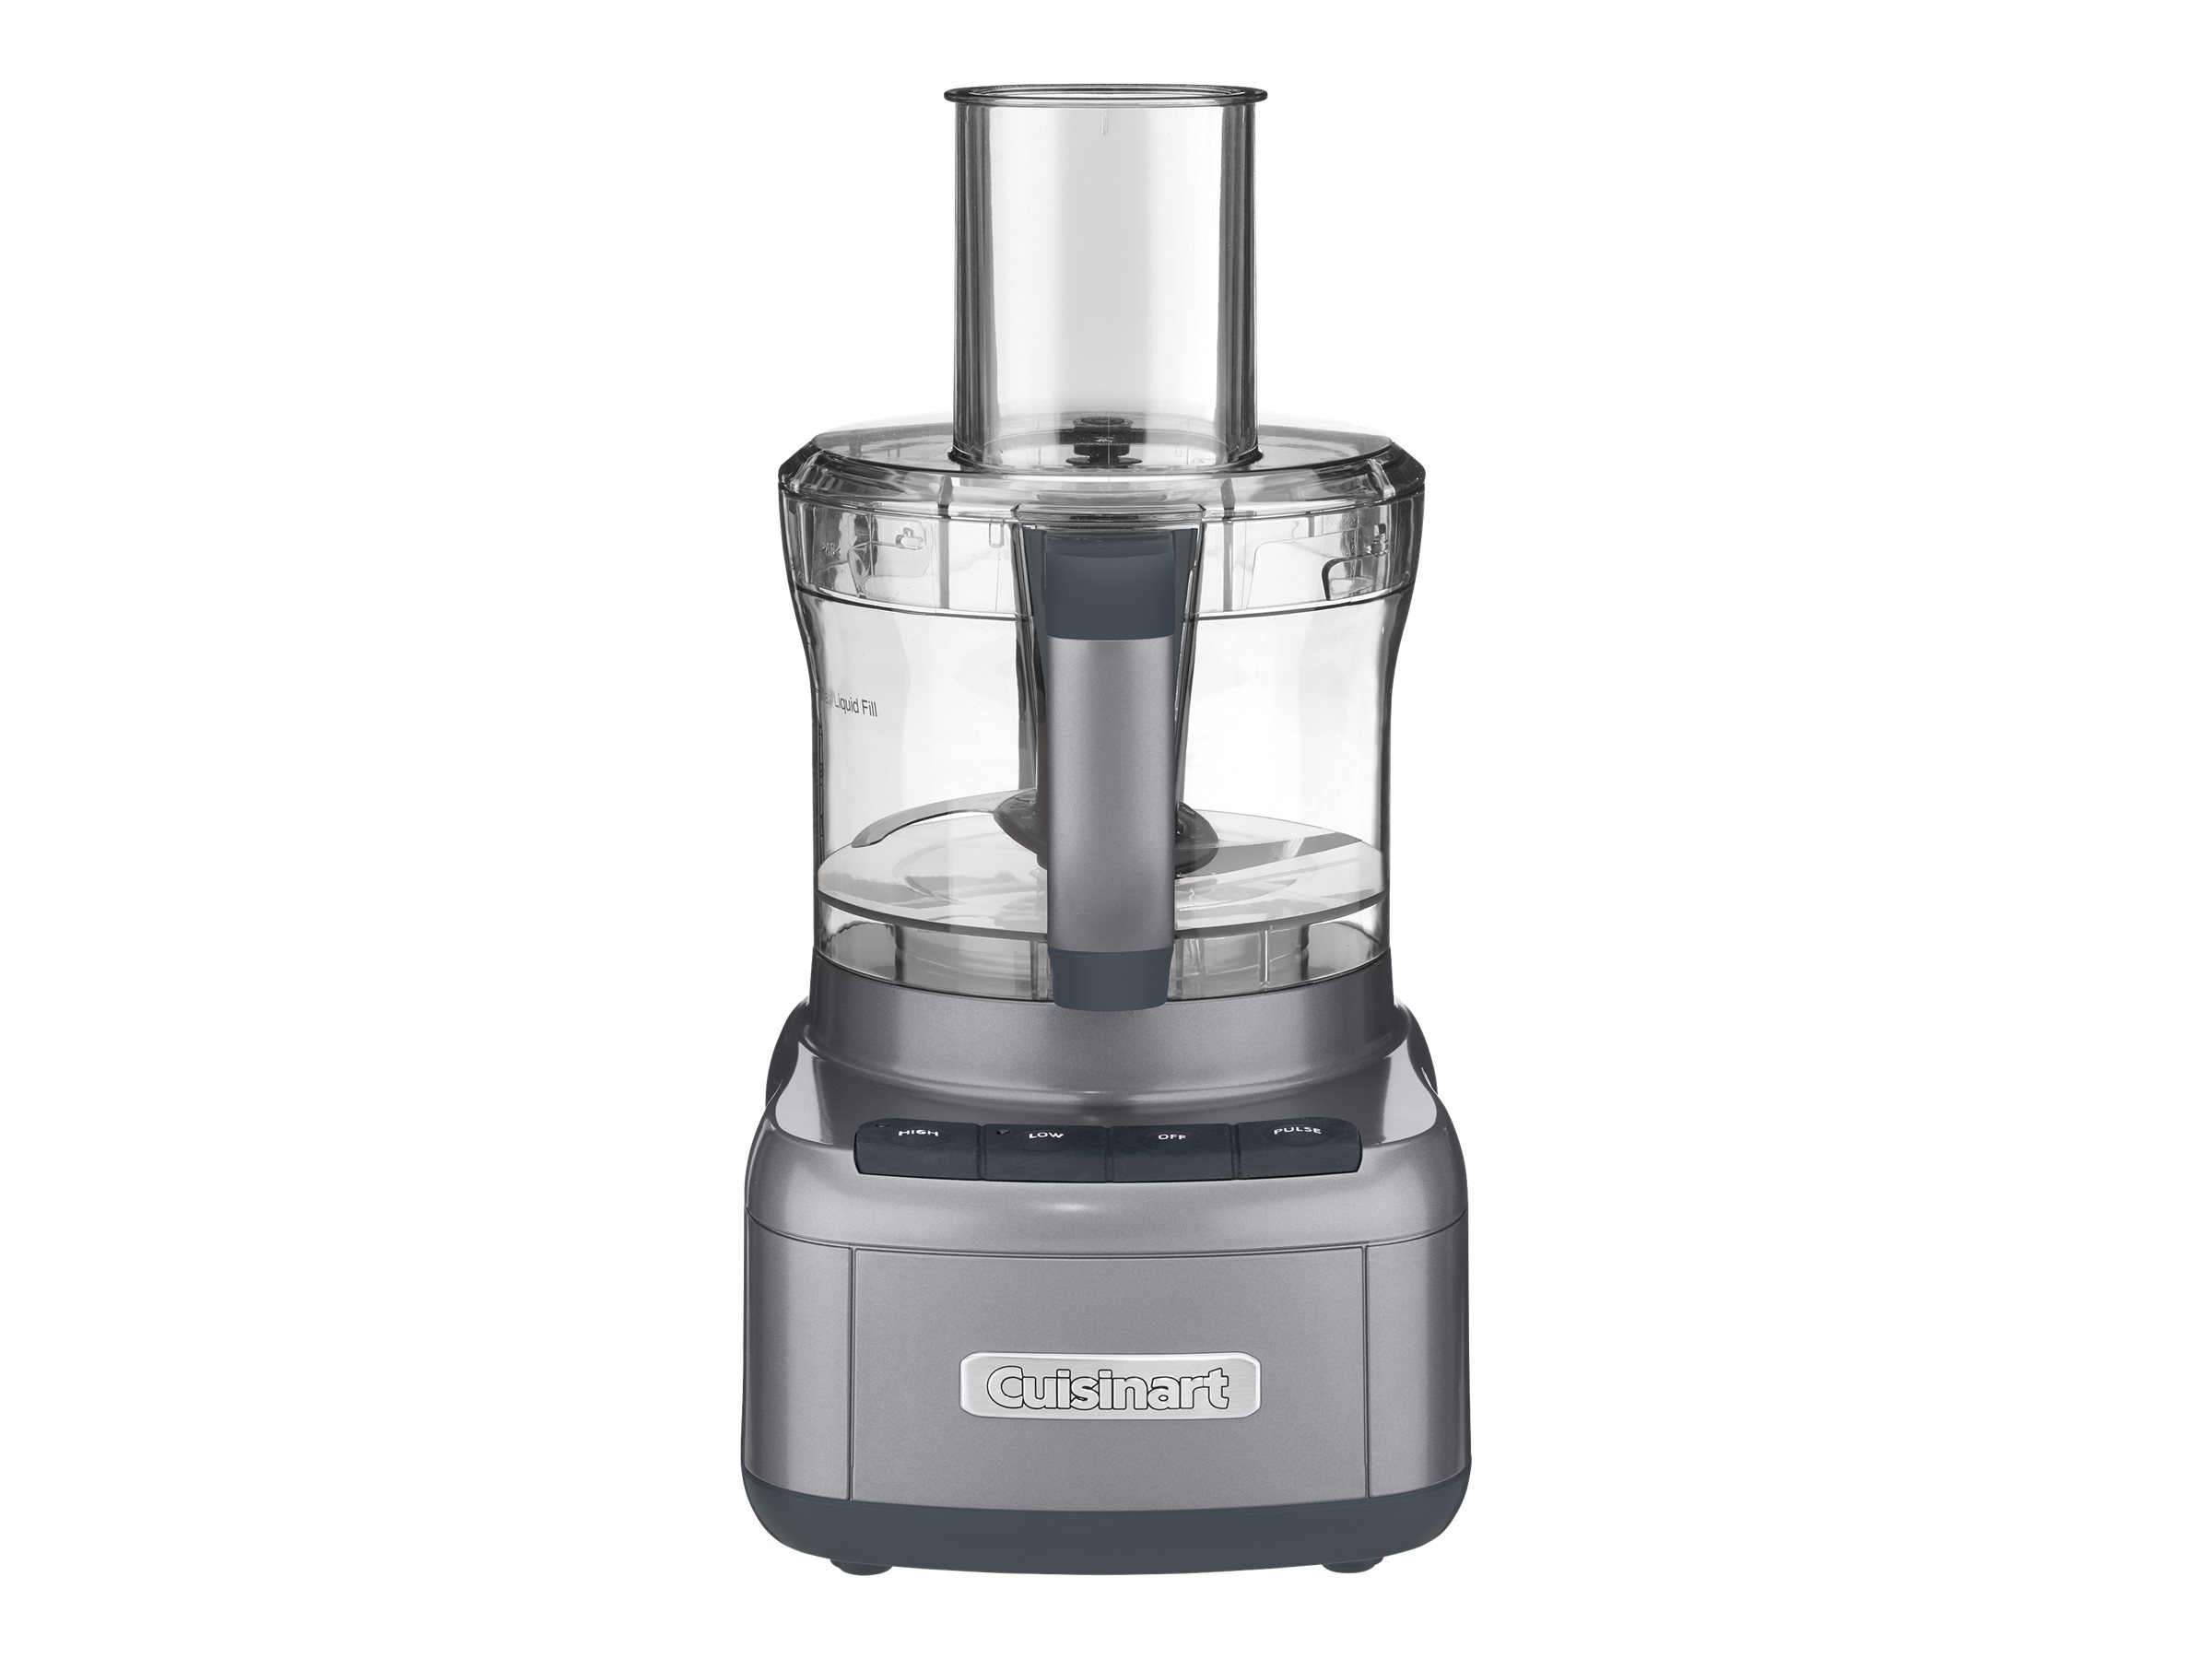 Cuisinart FP8GMP1 Elemental 8-Cup Food Processor - image 2 of 4